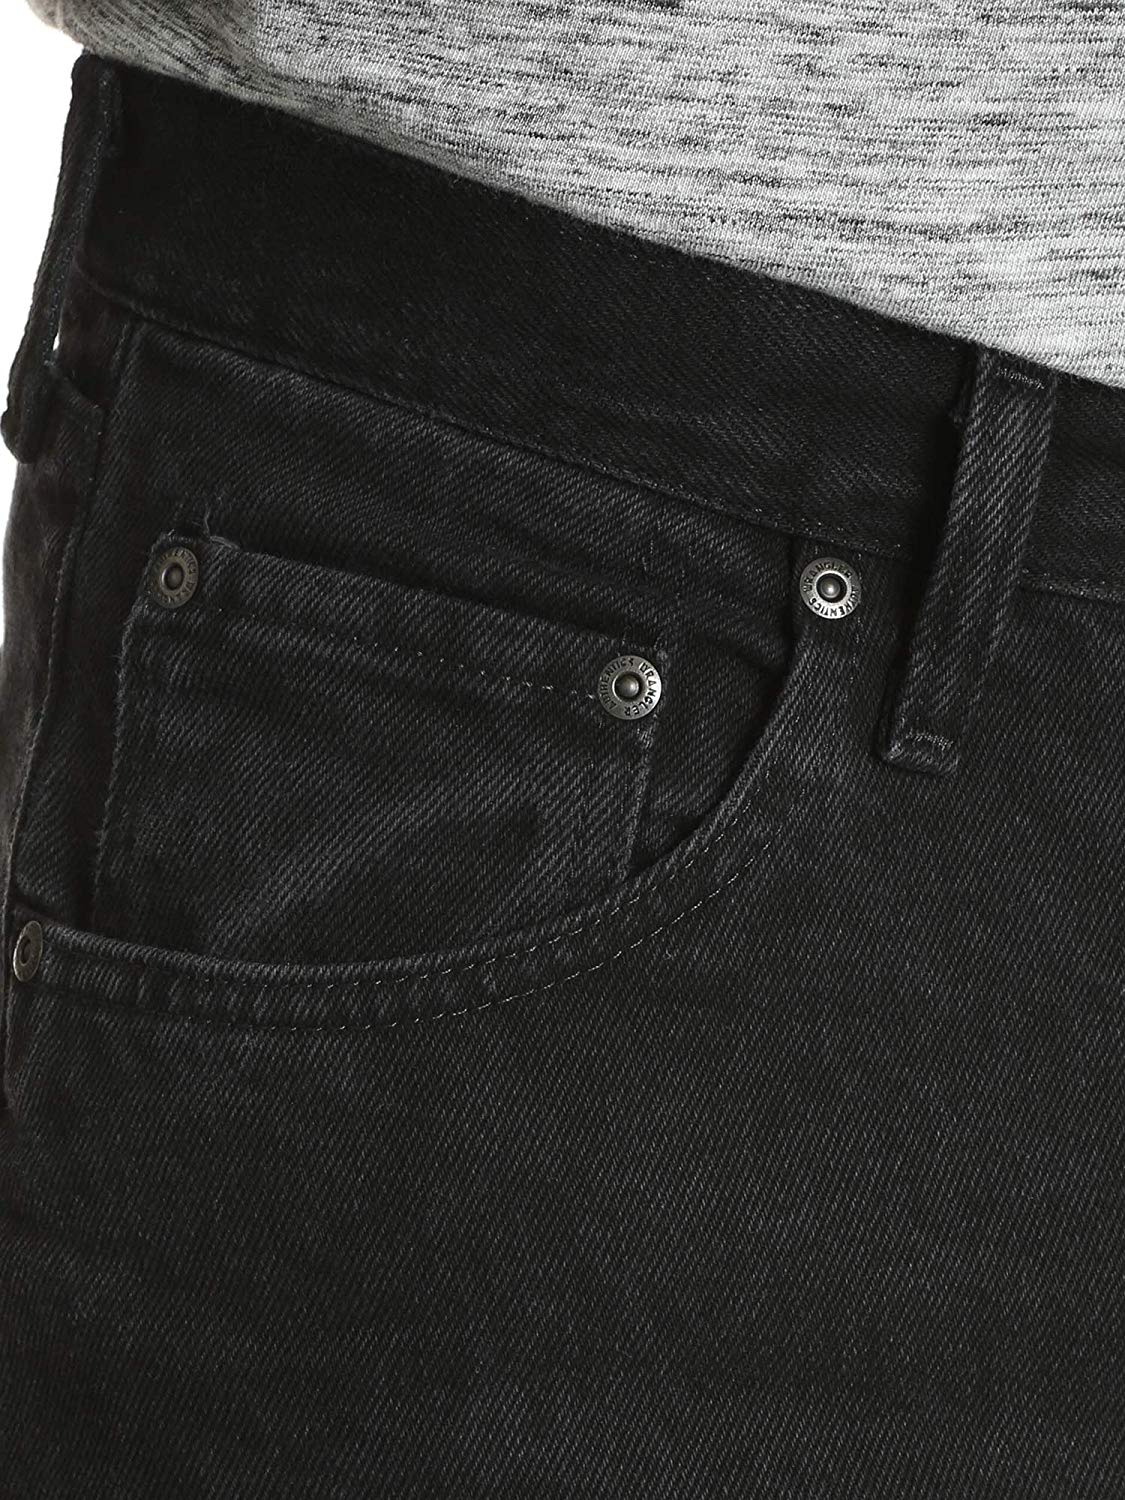 Wrangler Authentics Men's Classic Relaxed Fit Jean,, Black, Size 38W x ...